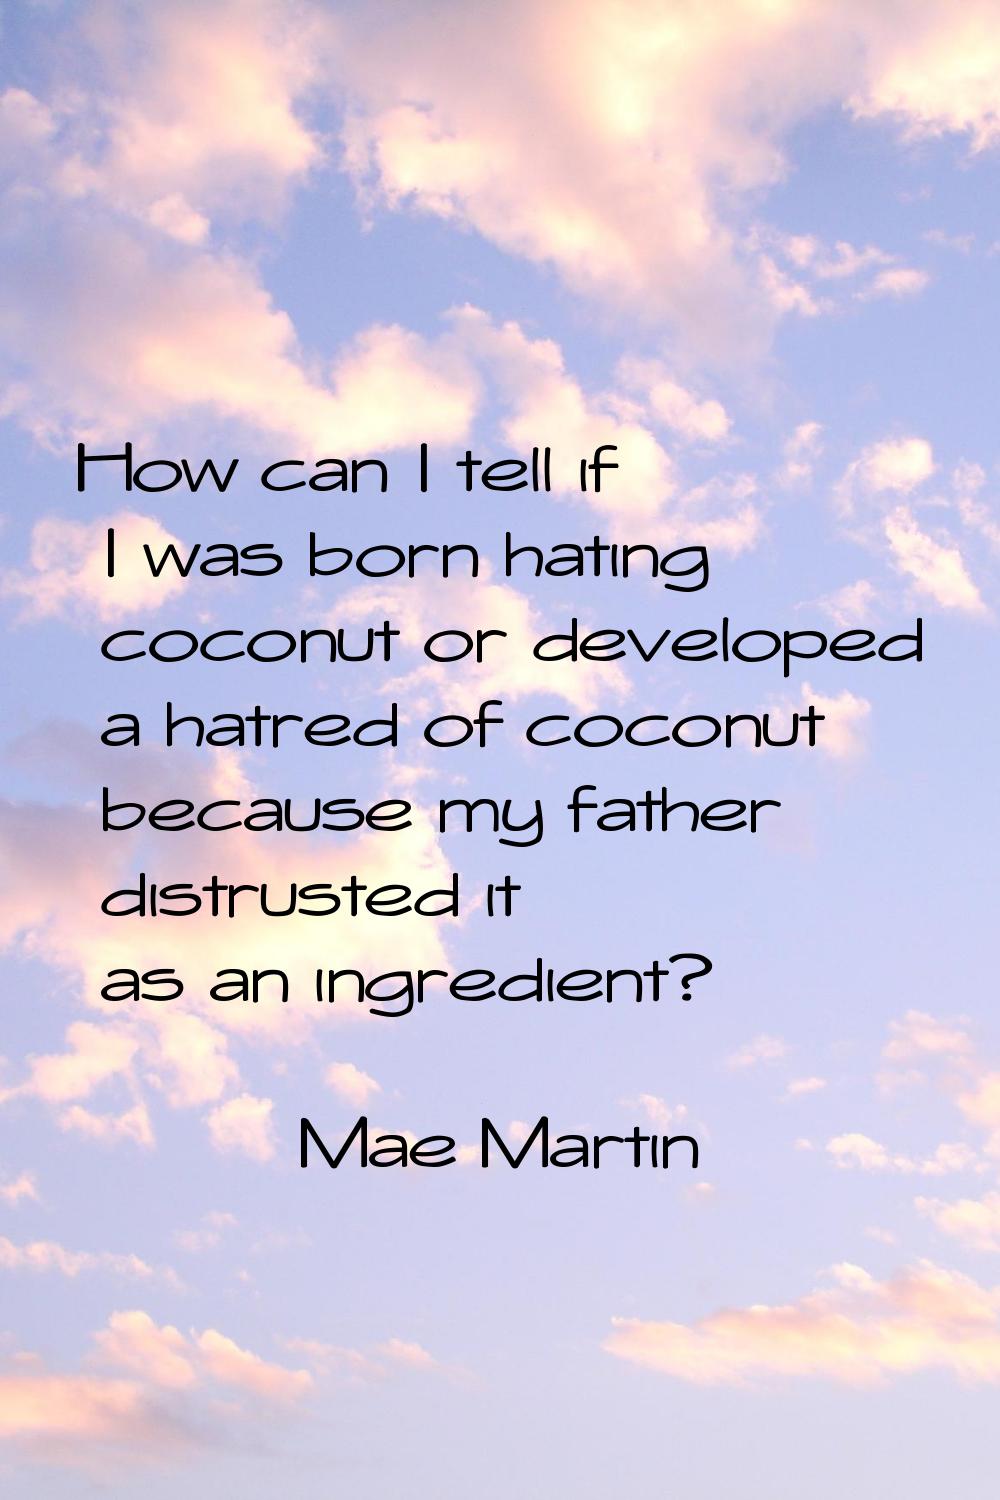 How can I tell if I was born hating coconut or developed a hatred of coconut because my father dist